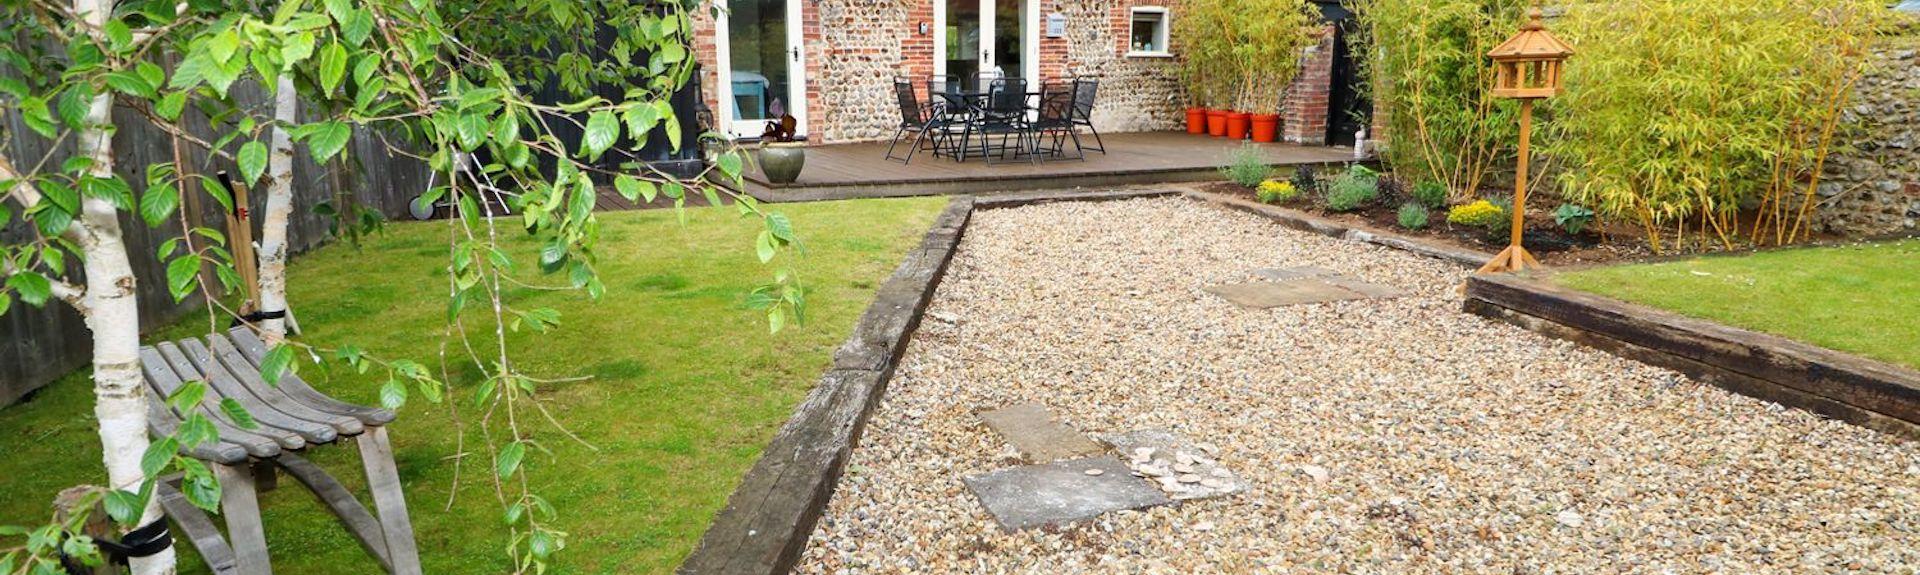 A shingle path leads up to a stone-built Norfolk bungalow with two long lawns.